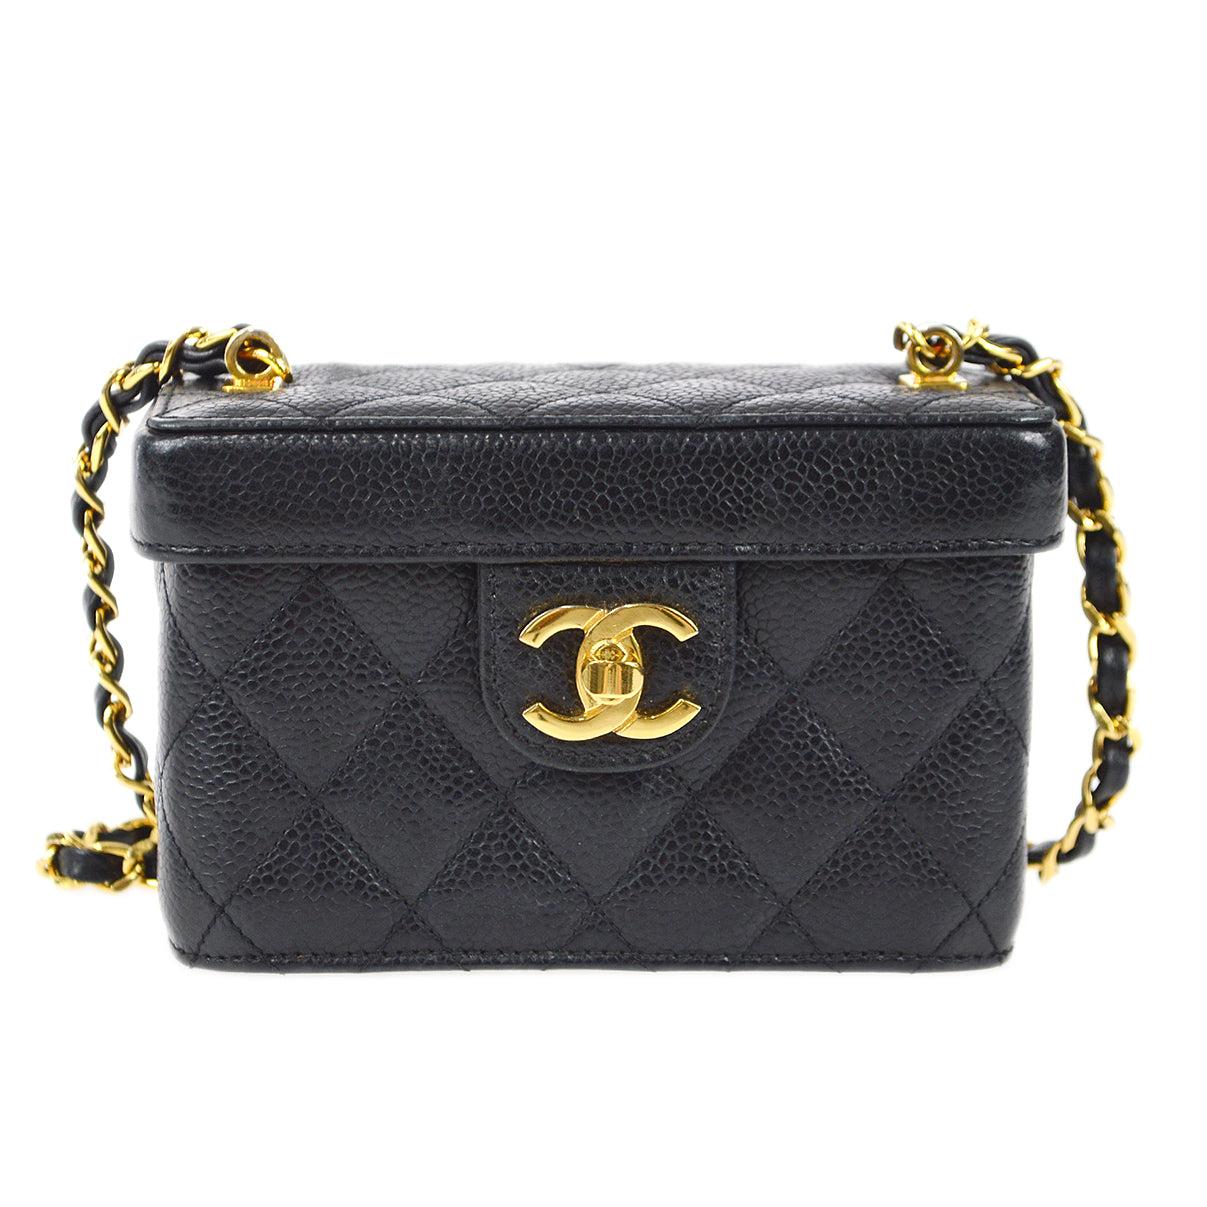 Is Chanel mini a good investment? - Questions & Answers